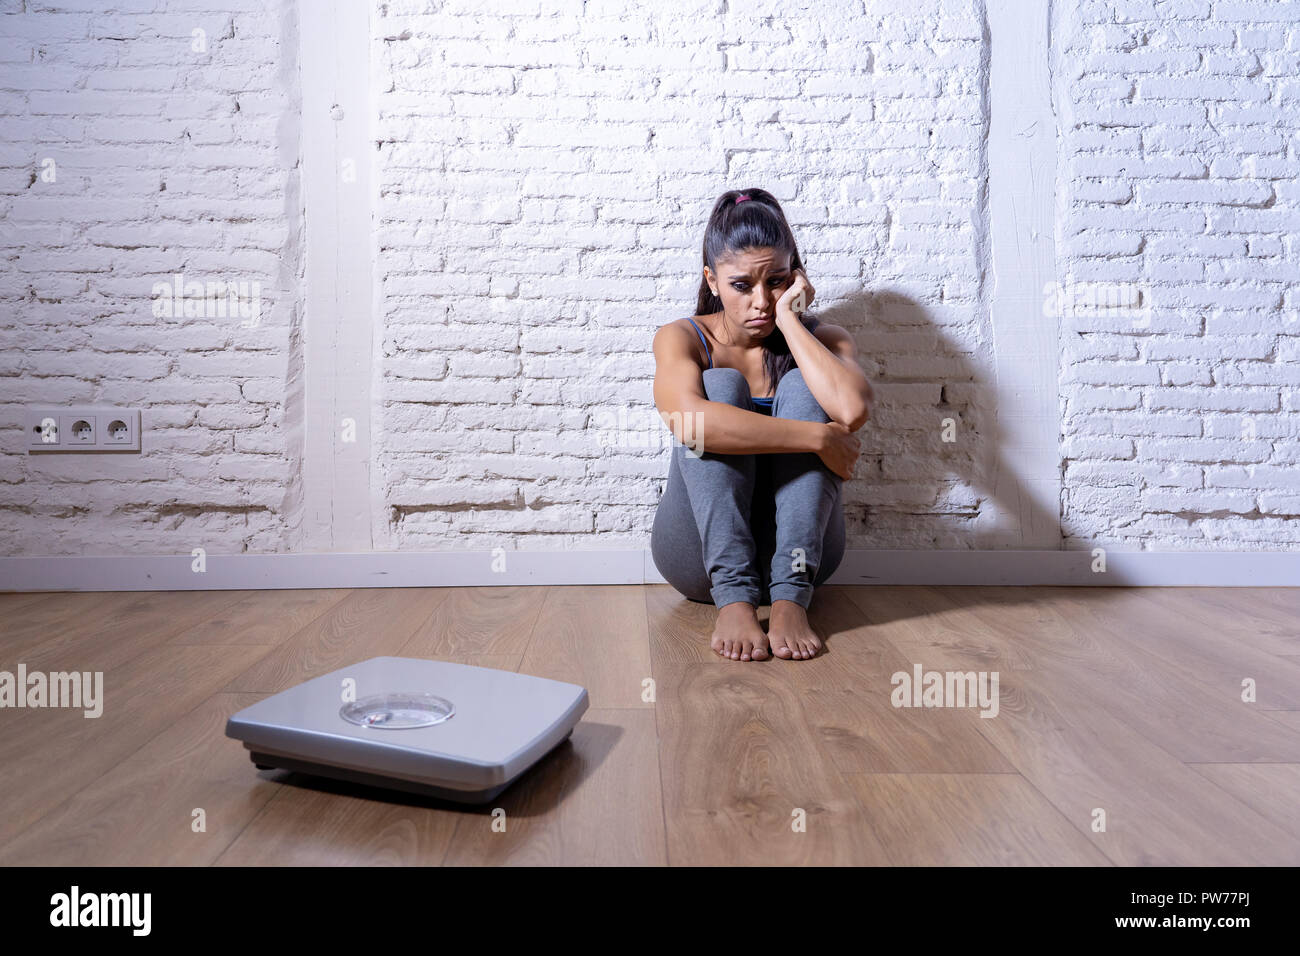 Young anorexic bulimic teenager woman sitting alone on ground looking at the scale worried and depressed in failing dieting and eating nutrition disor Stock Photo